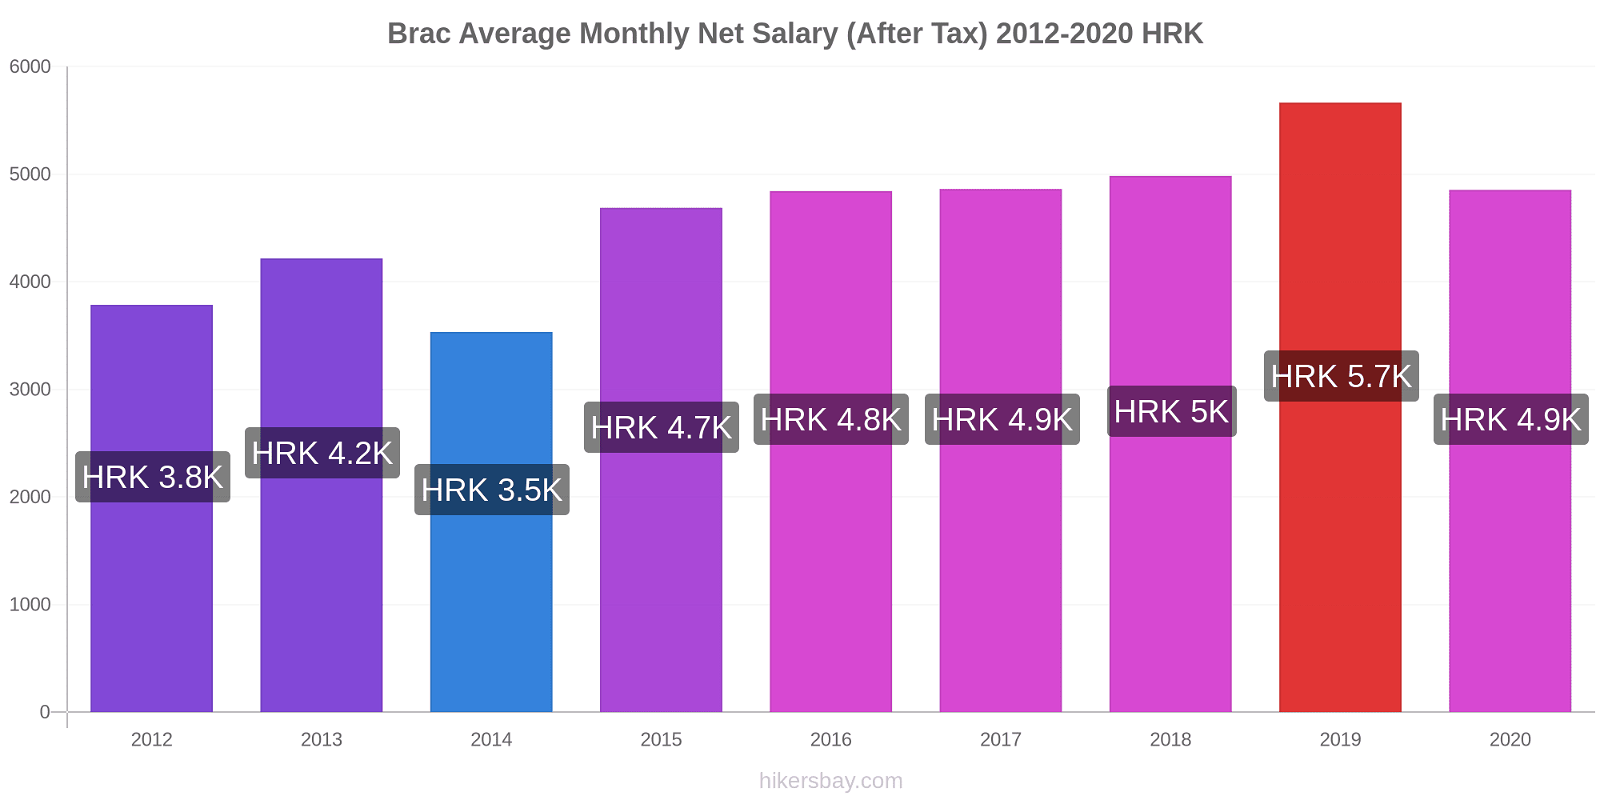 Brac price changes Average Monthly Net Salary (After Tax) hikersbay.com